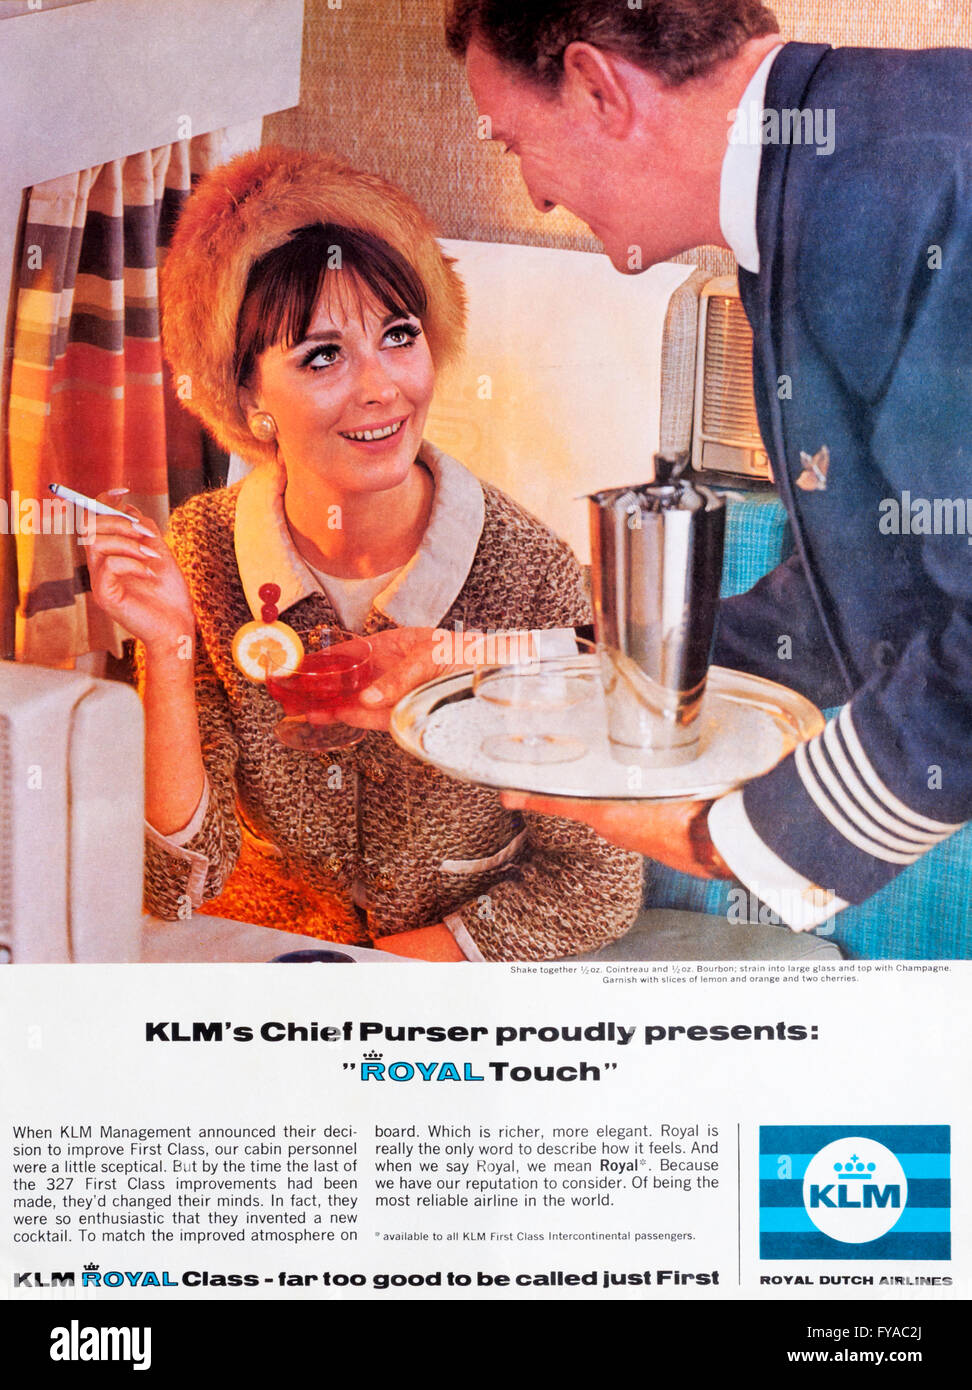 1960s magazine advertisement advertising KLM, Royal Dutch Airlines. Stock Photo